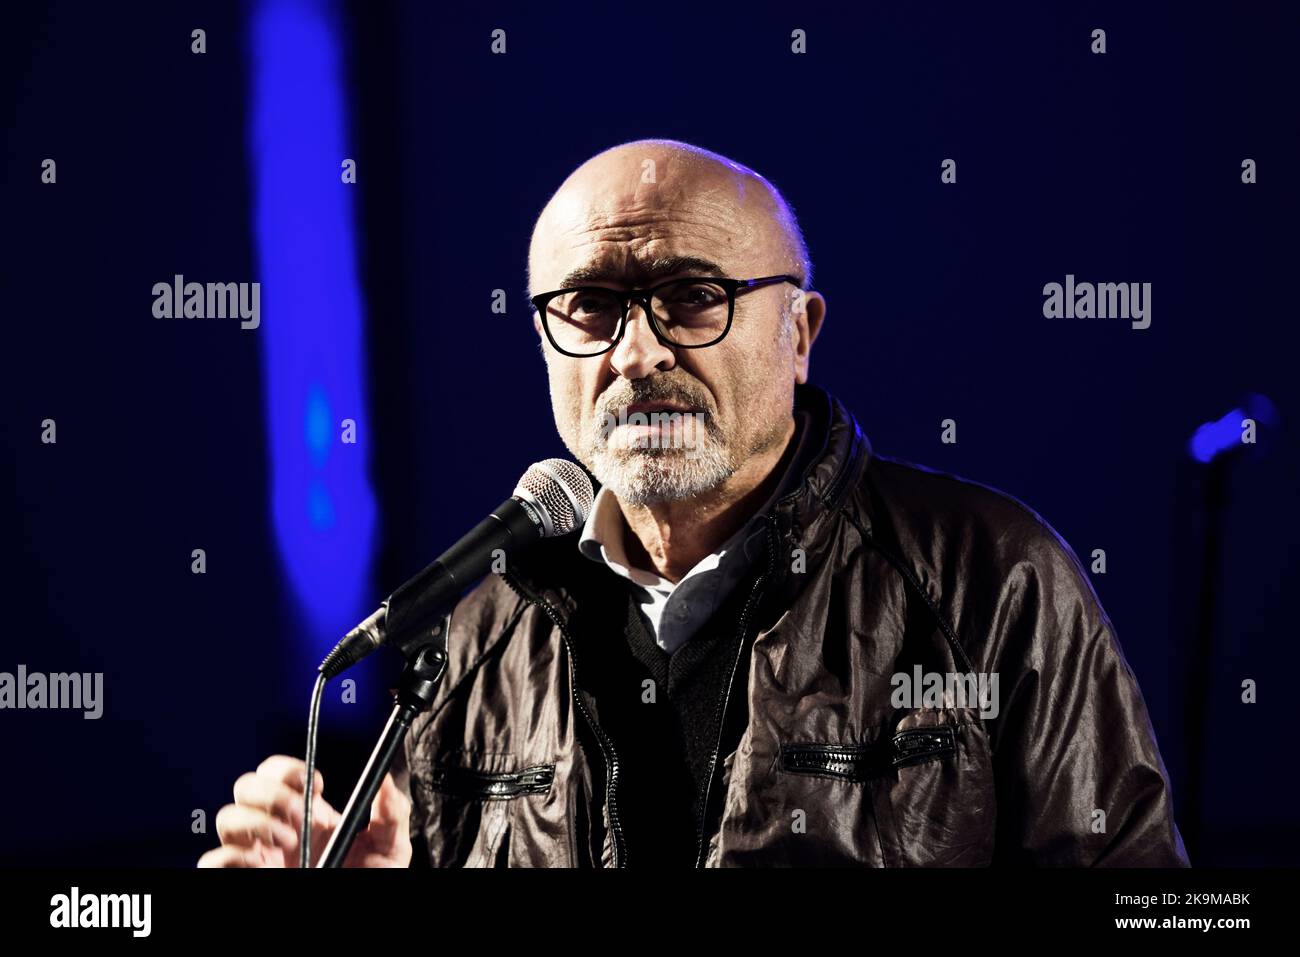 Paraloup (Cuneo), Italy. 29 July 2018. The actor Ivano Marescotti at the Frontière Festival Stock Photo